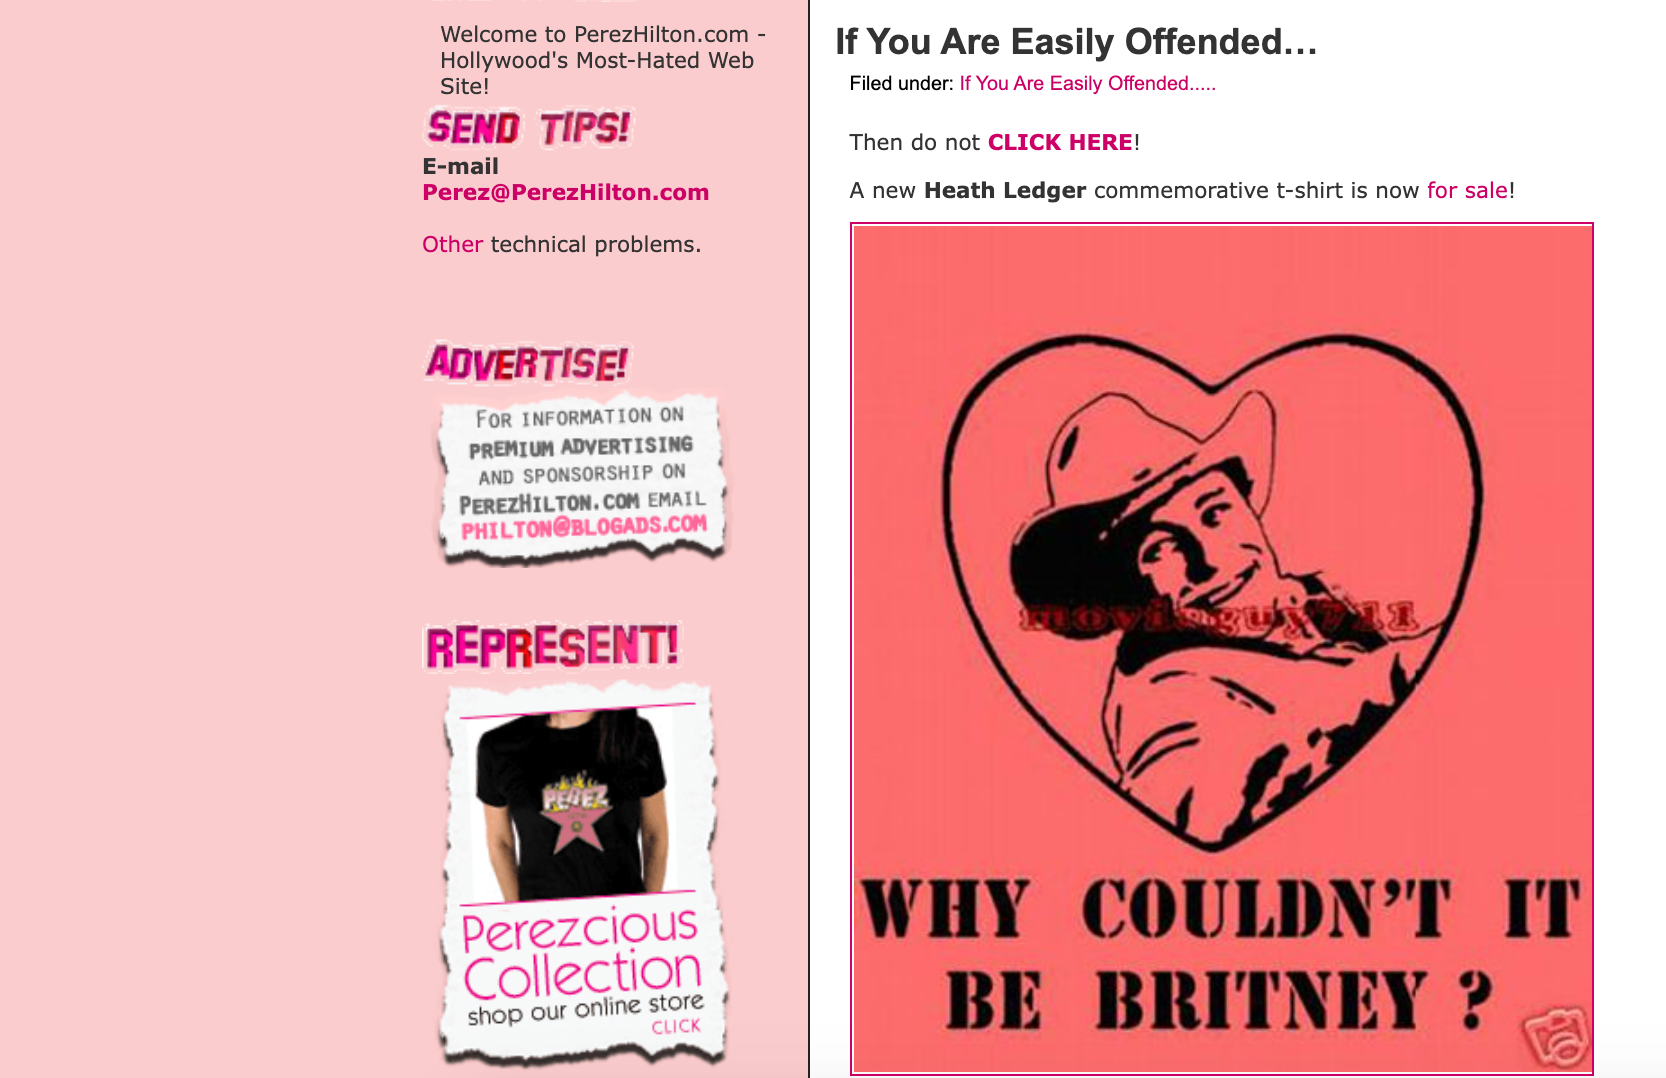 screenshot from Perez Hilton's website. A post advertises a "commemorative Heath Ledger t-shirt" with a design below: an illustration of Ledger above the words "Why couldn't it be Britney?"